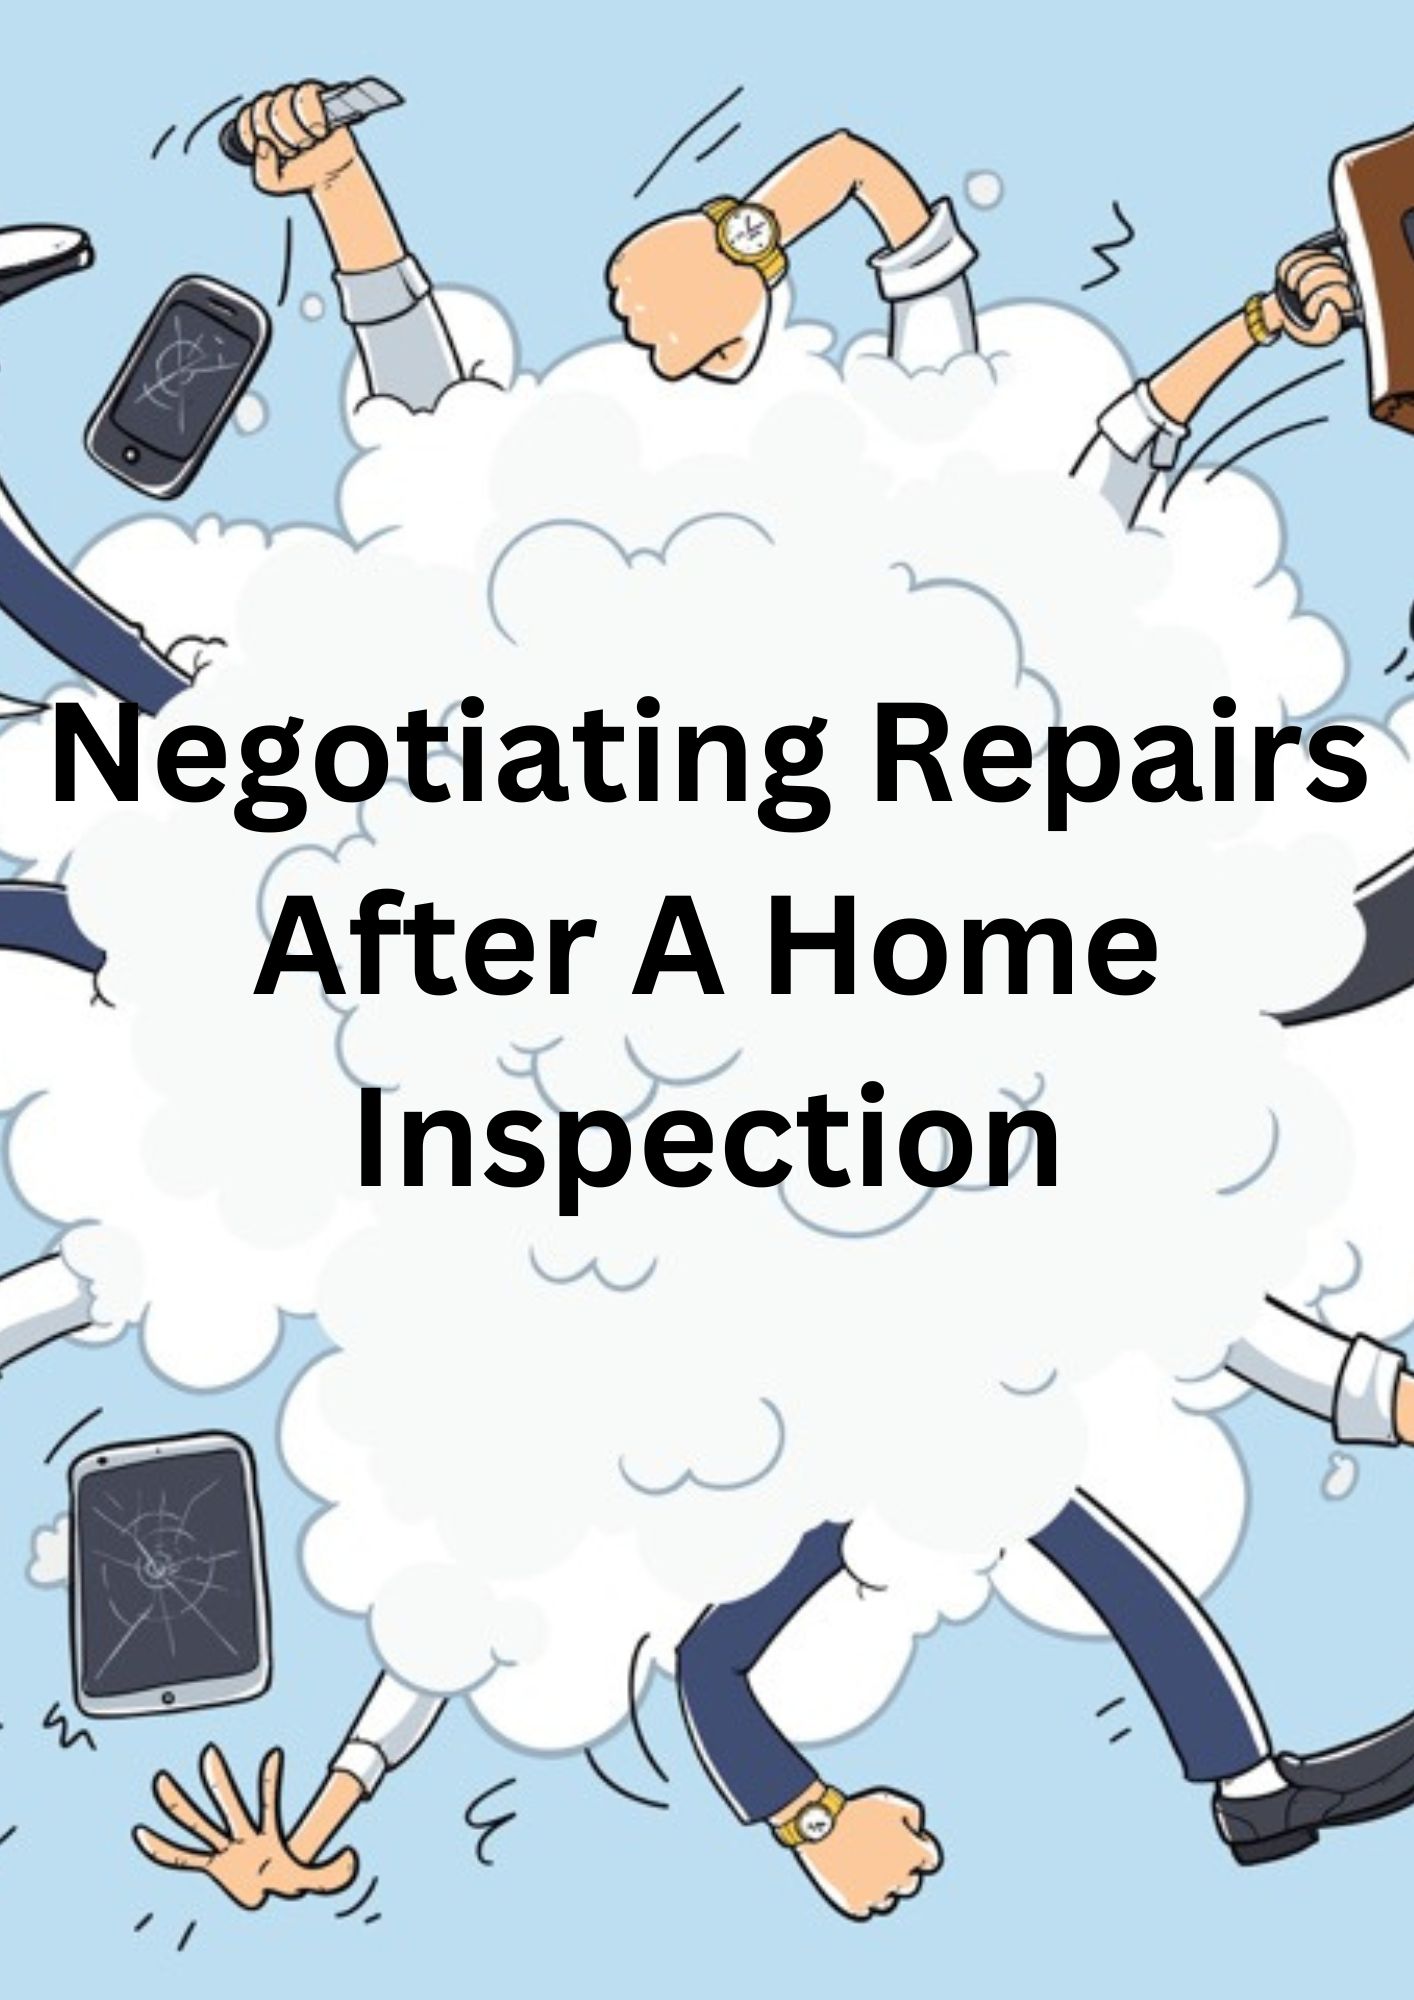 Negotiating Repairs After A Home Inspection